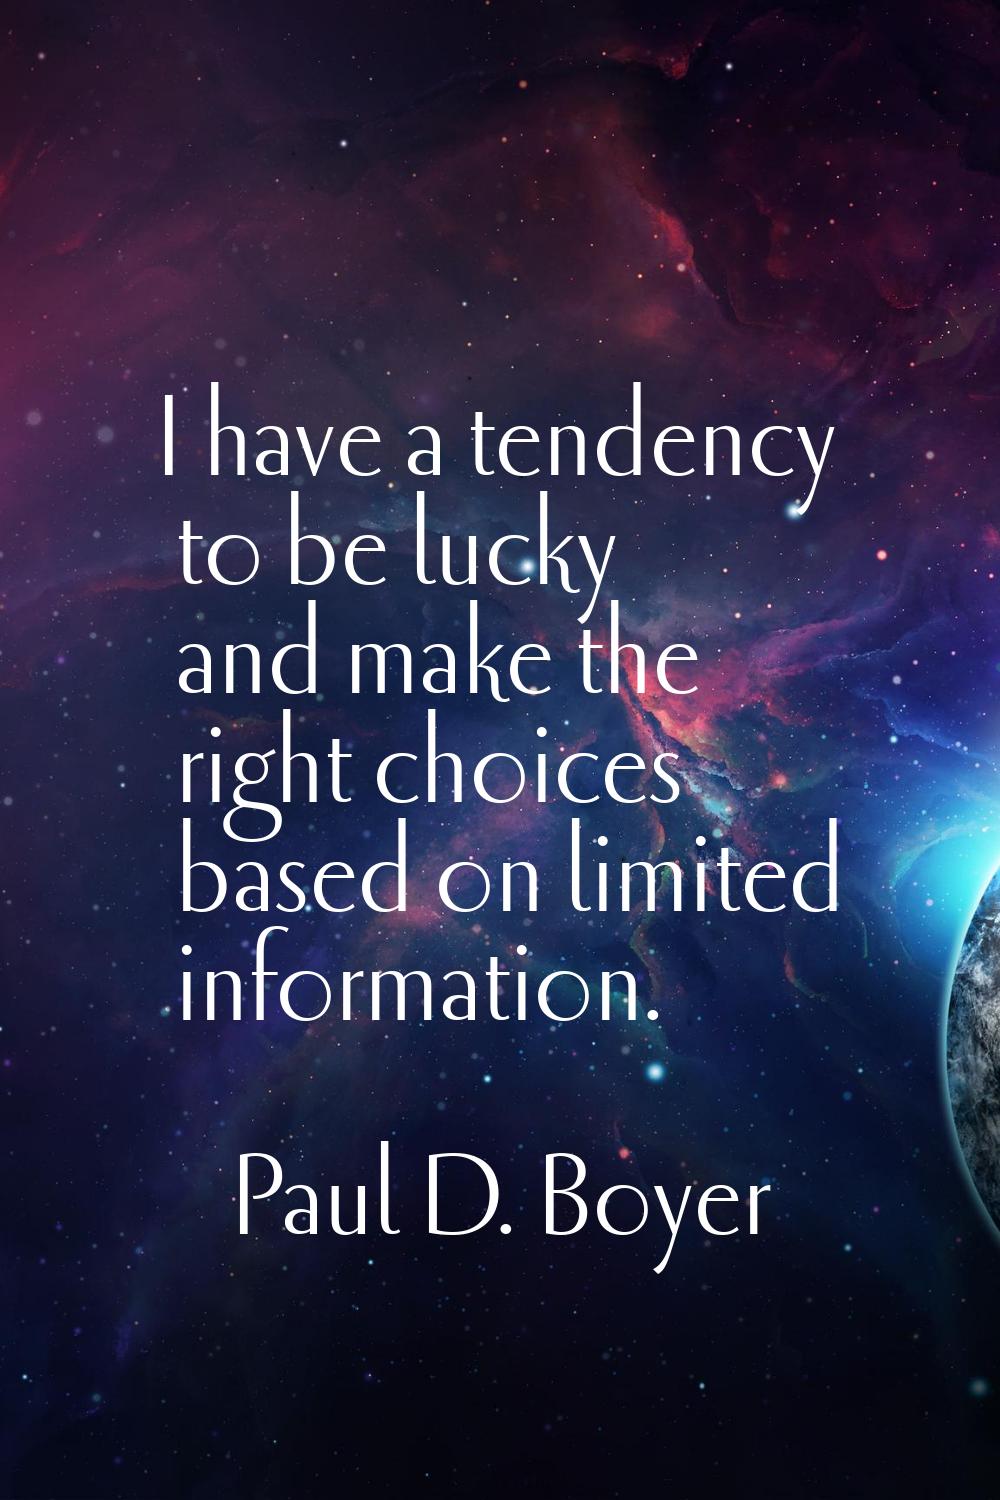 I have a tendency to be lucky and make the right choices based on limited information.